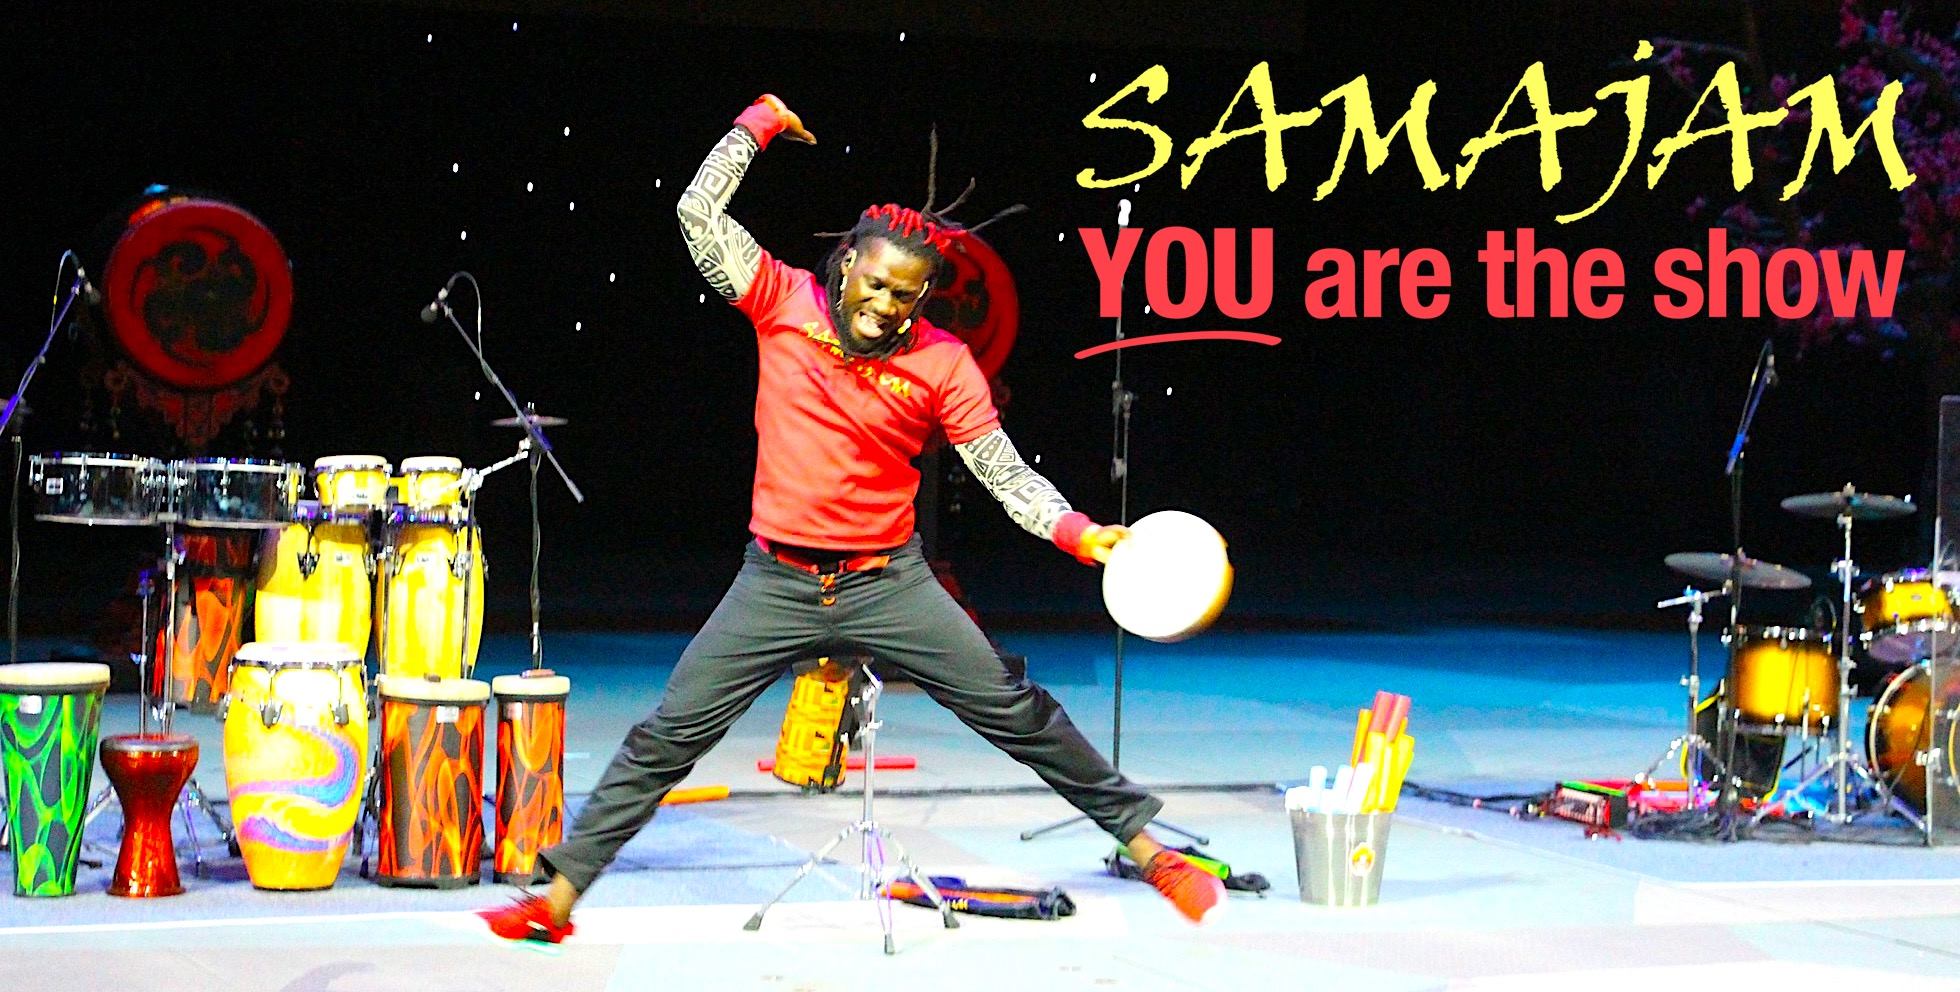 You are the show at SAMAJAM’s interactive musical extravaganza